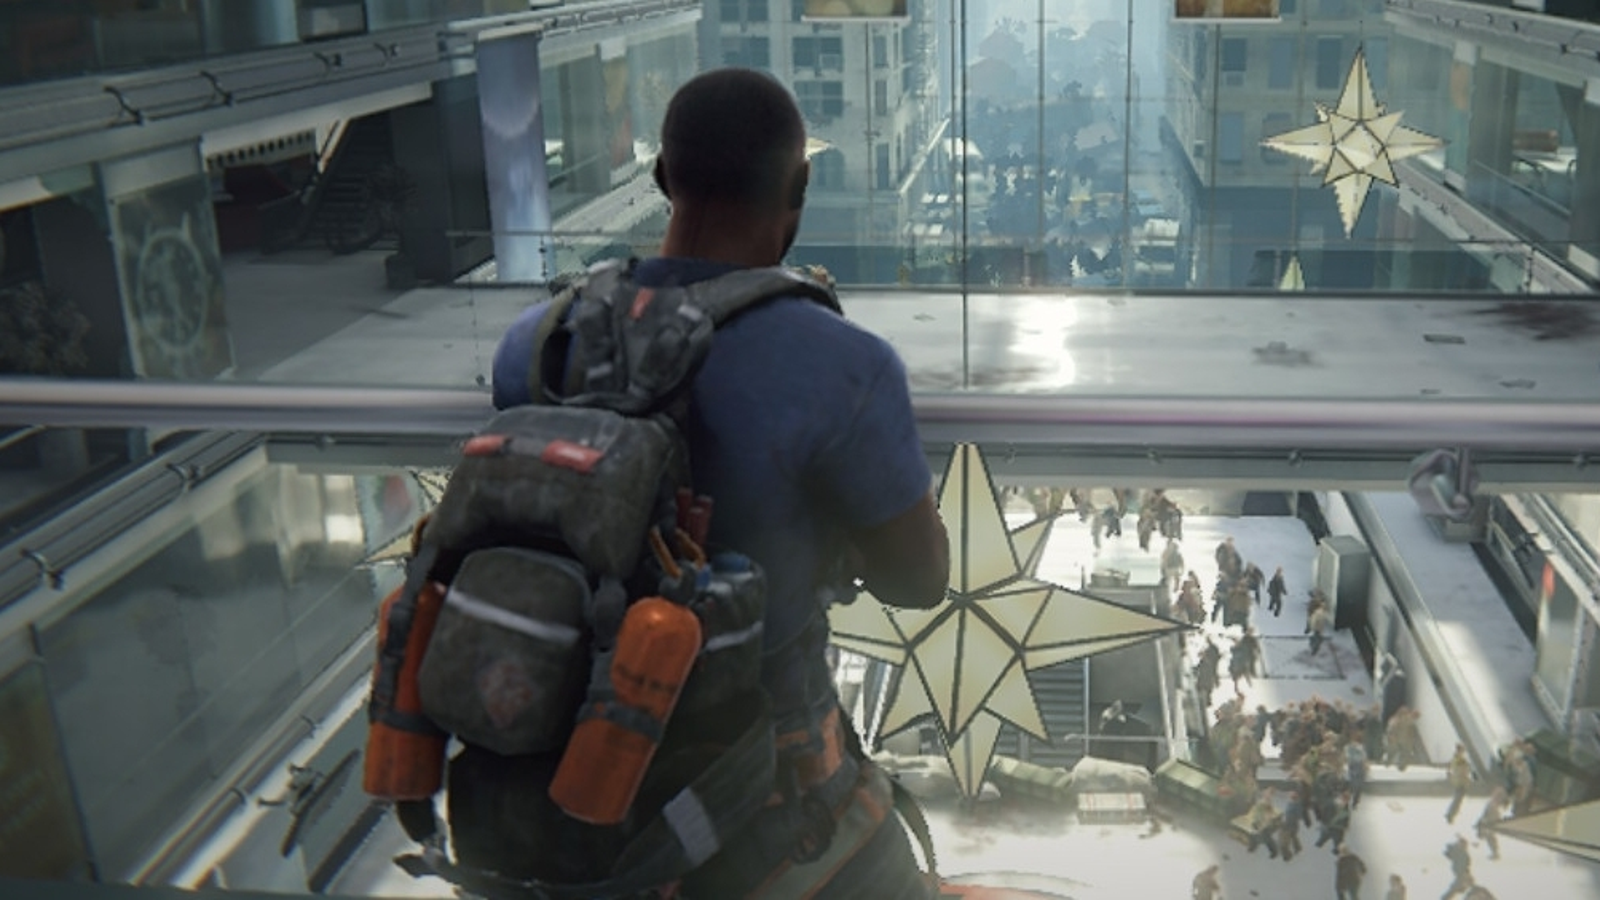 World War Z: Four-player cooperative third-person shooter